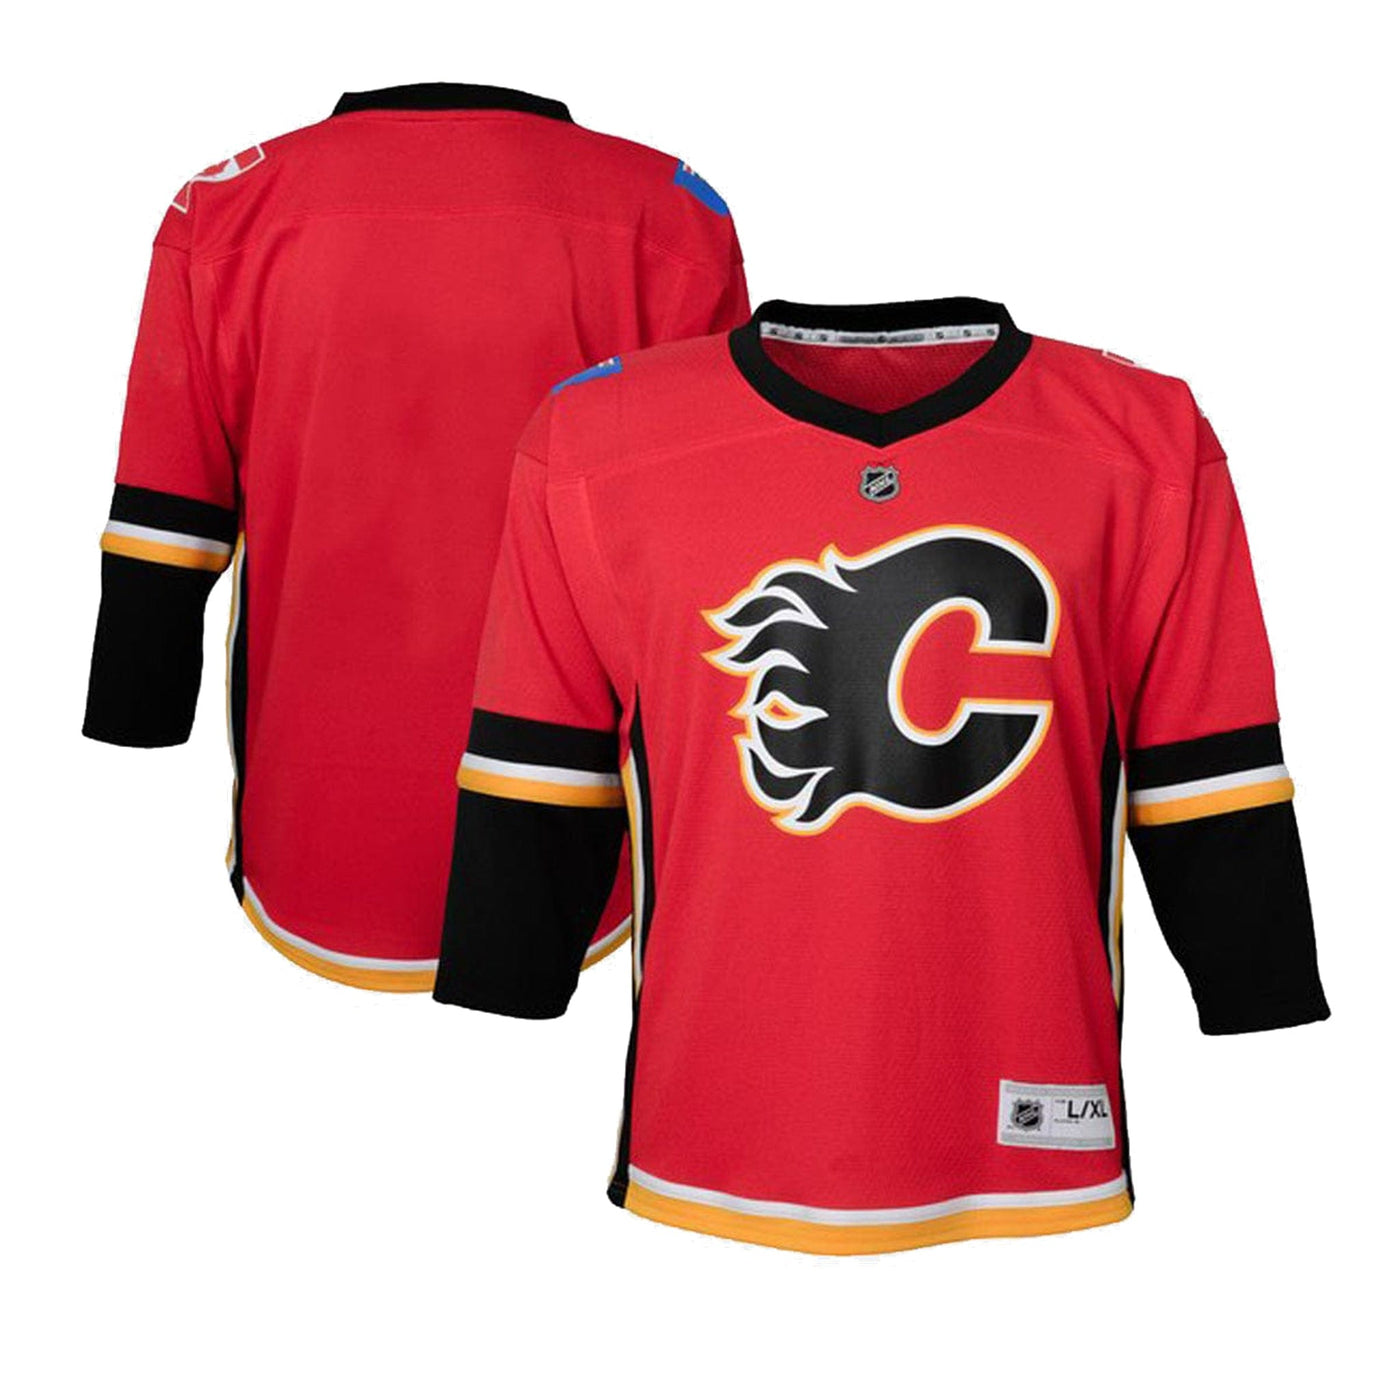 Calgary Flames Home Outer Stuff Replica Toddler Jersey - The Hockey Shop Source For Sports